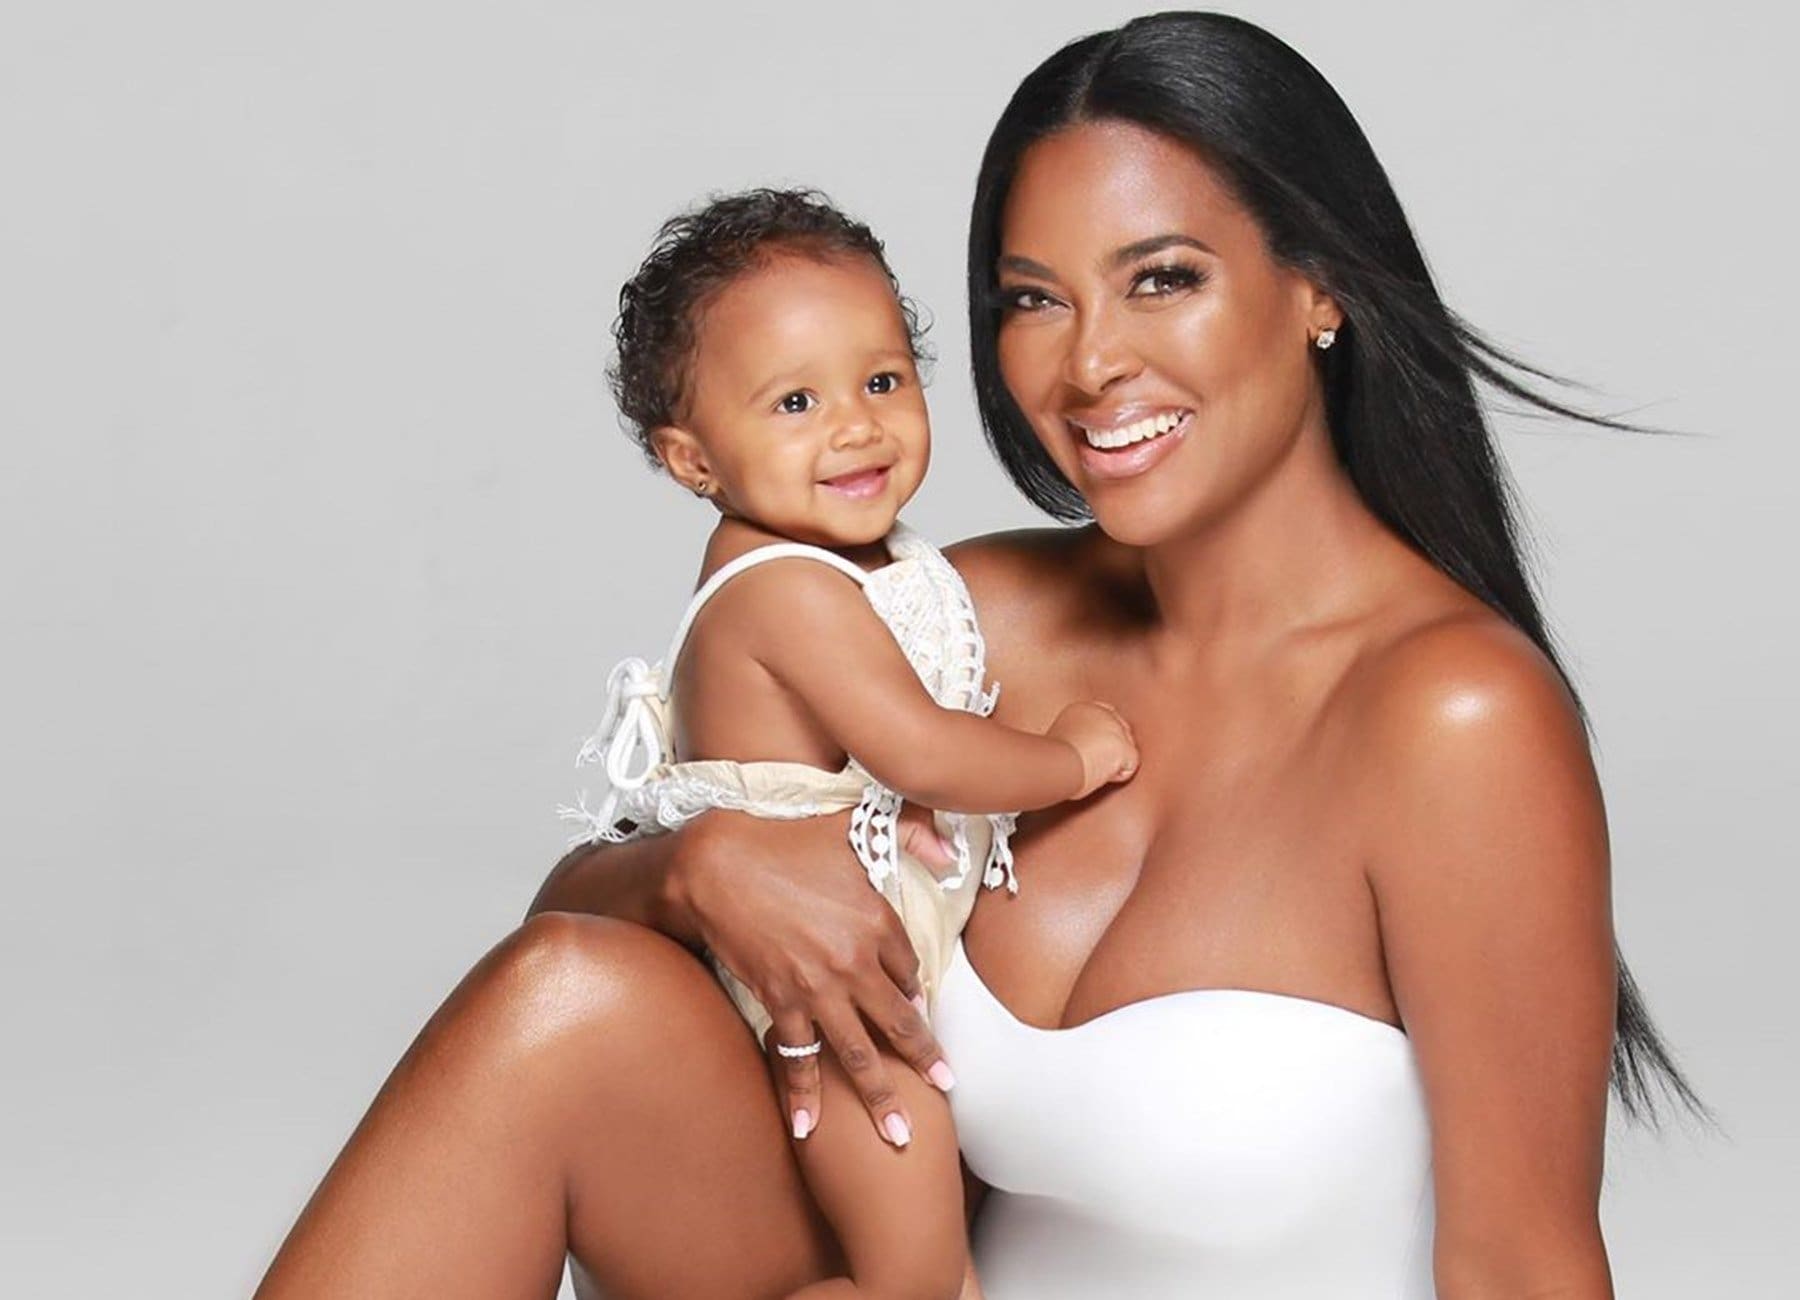 Kenya Moore's Baby Girls, Brooklyn Daly Is Living Her Hot Girl Summer And She's Learning How To Talk